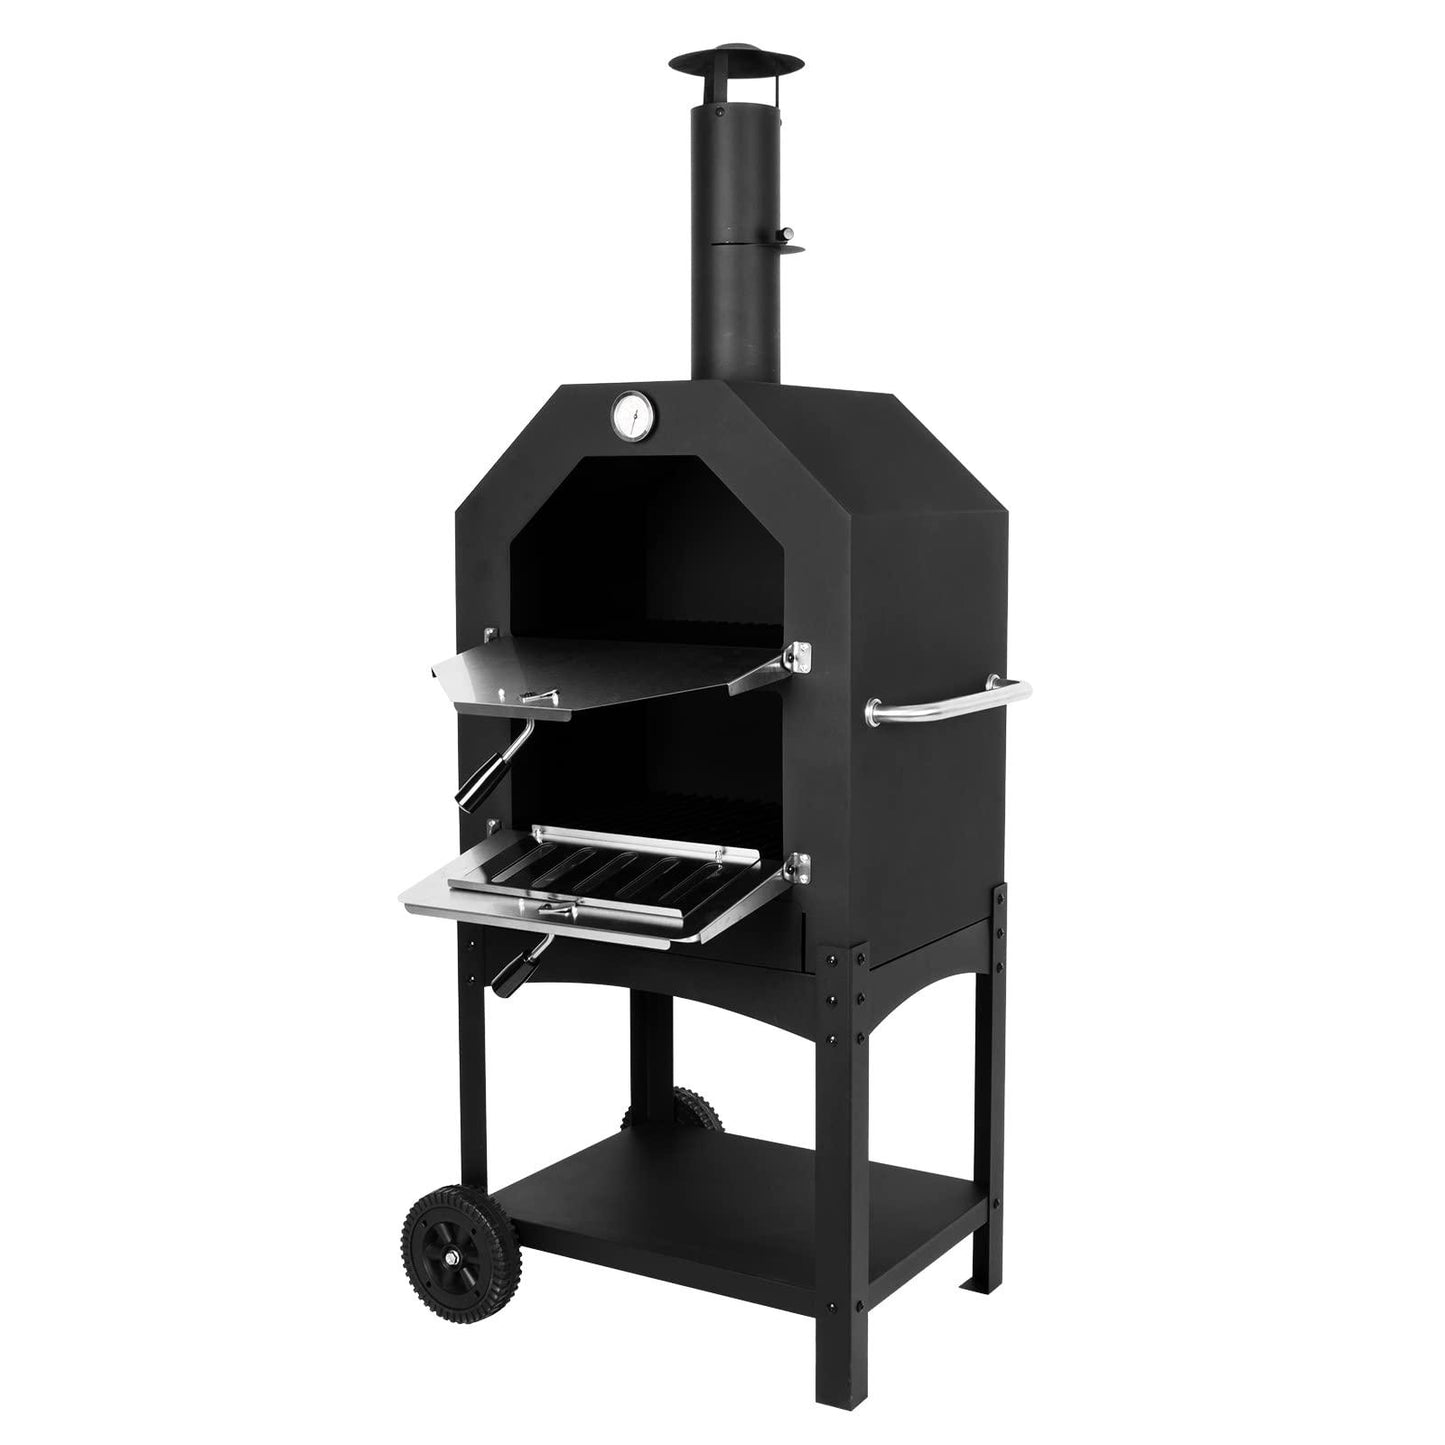 Outdoor Pizza Oven Wood Fired Pizza Oven Patio Portable Pizza Maker Cooking Grill with Wheels Waterproof Cover for Backyard Camping - CookCave